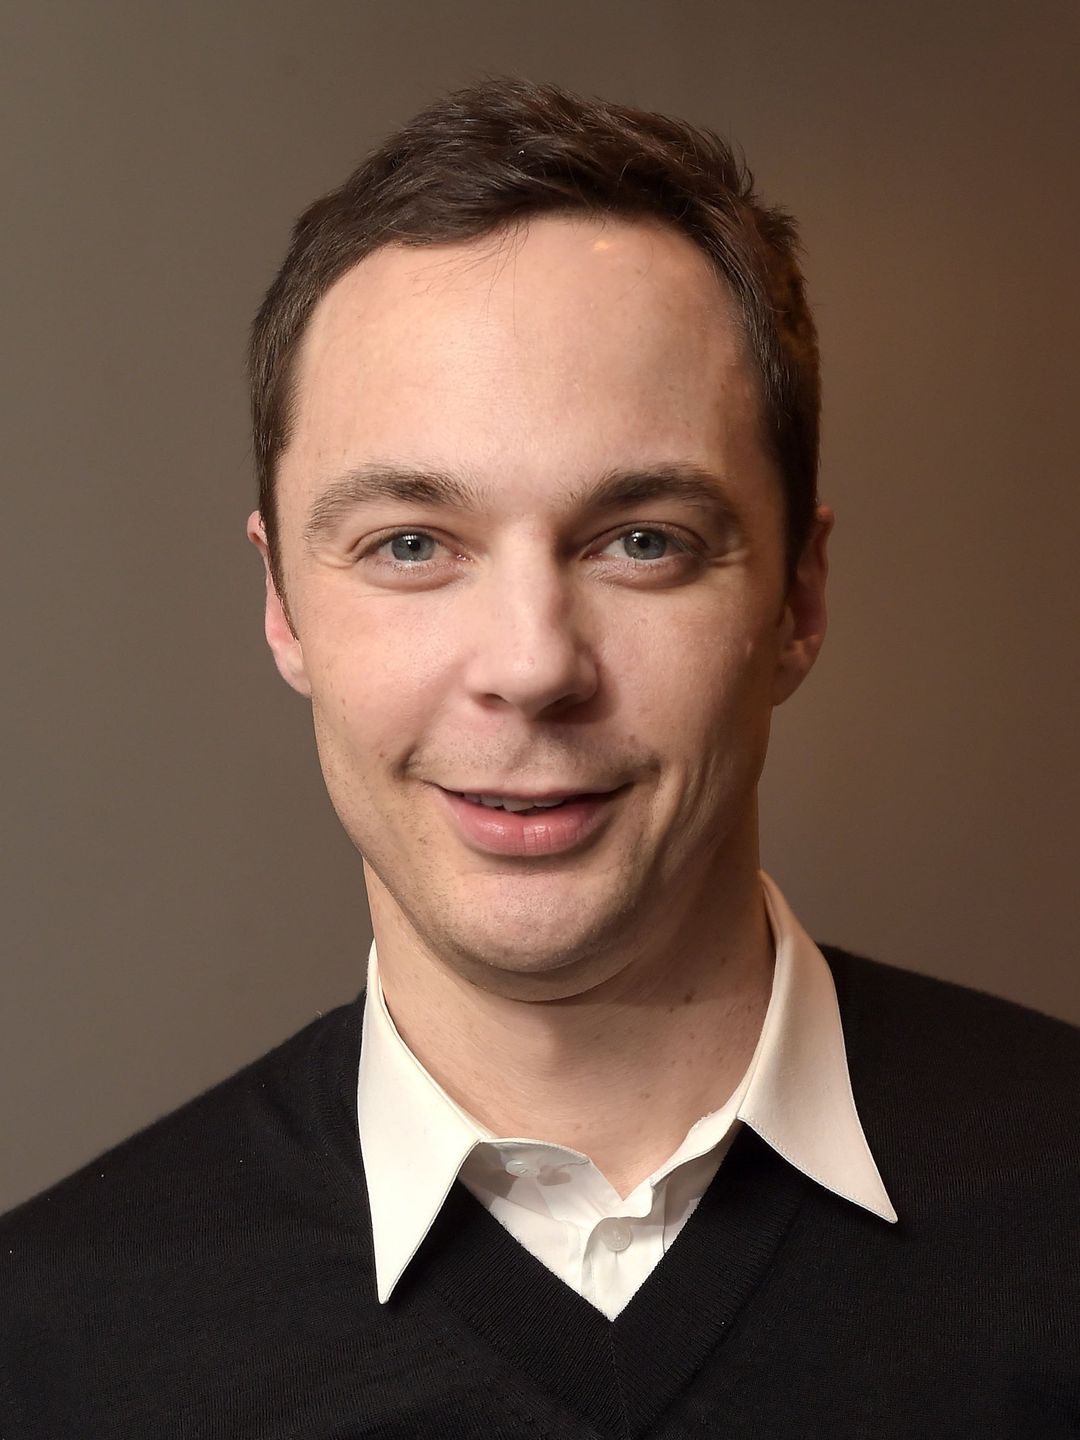 Jim Parsons how did he became famous